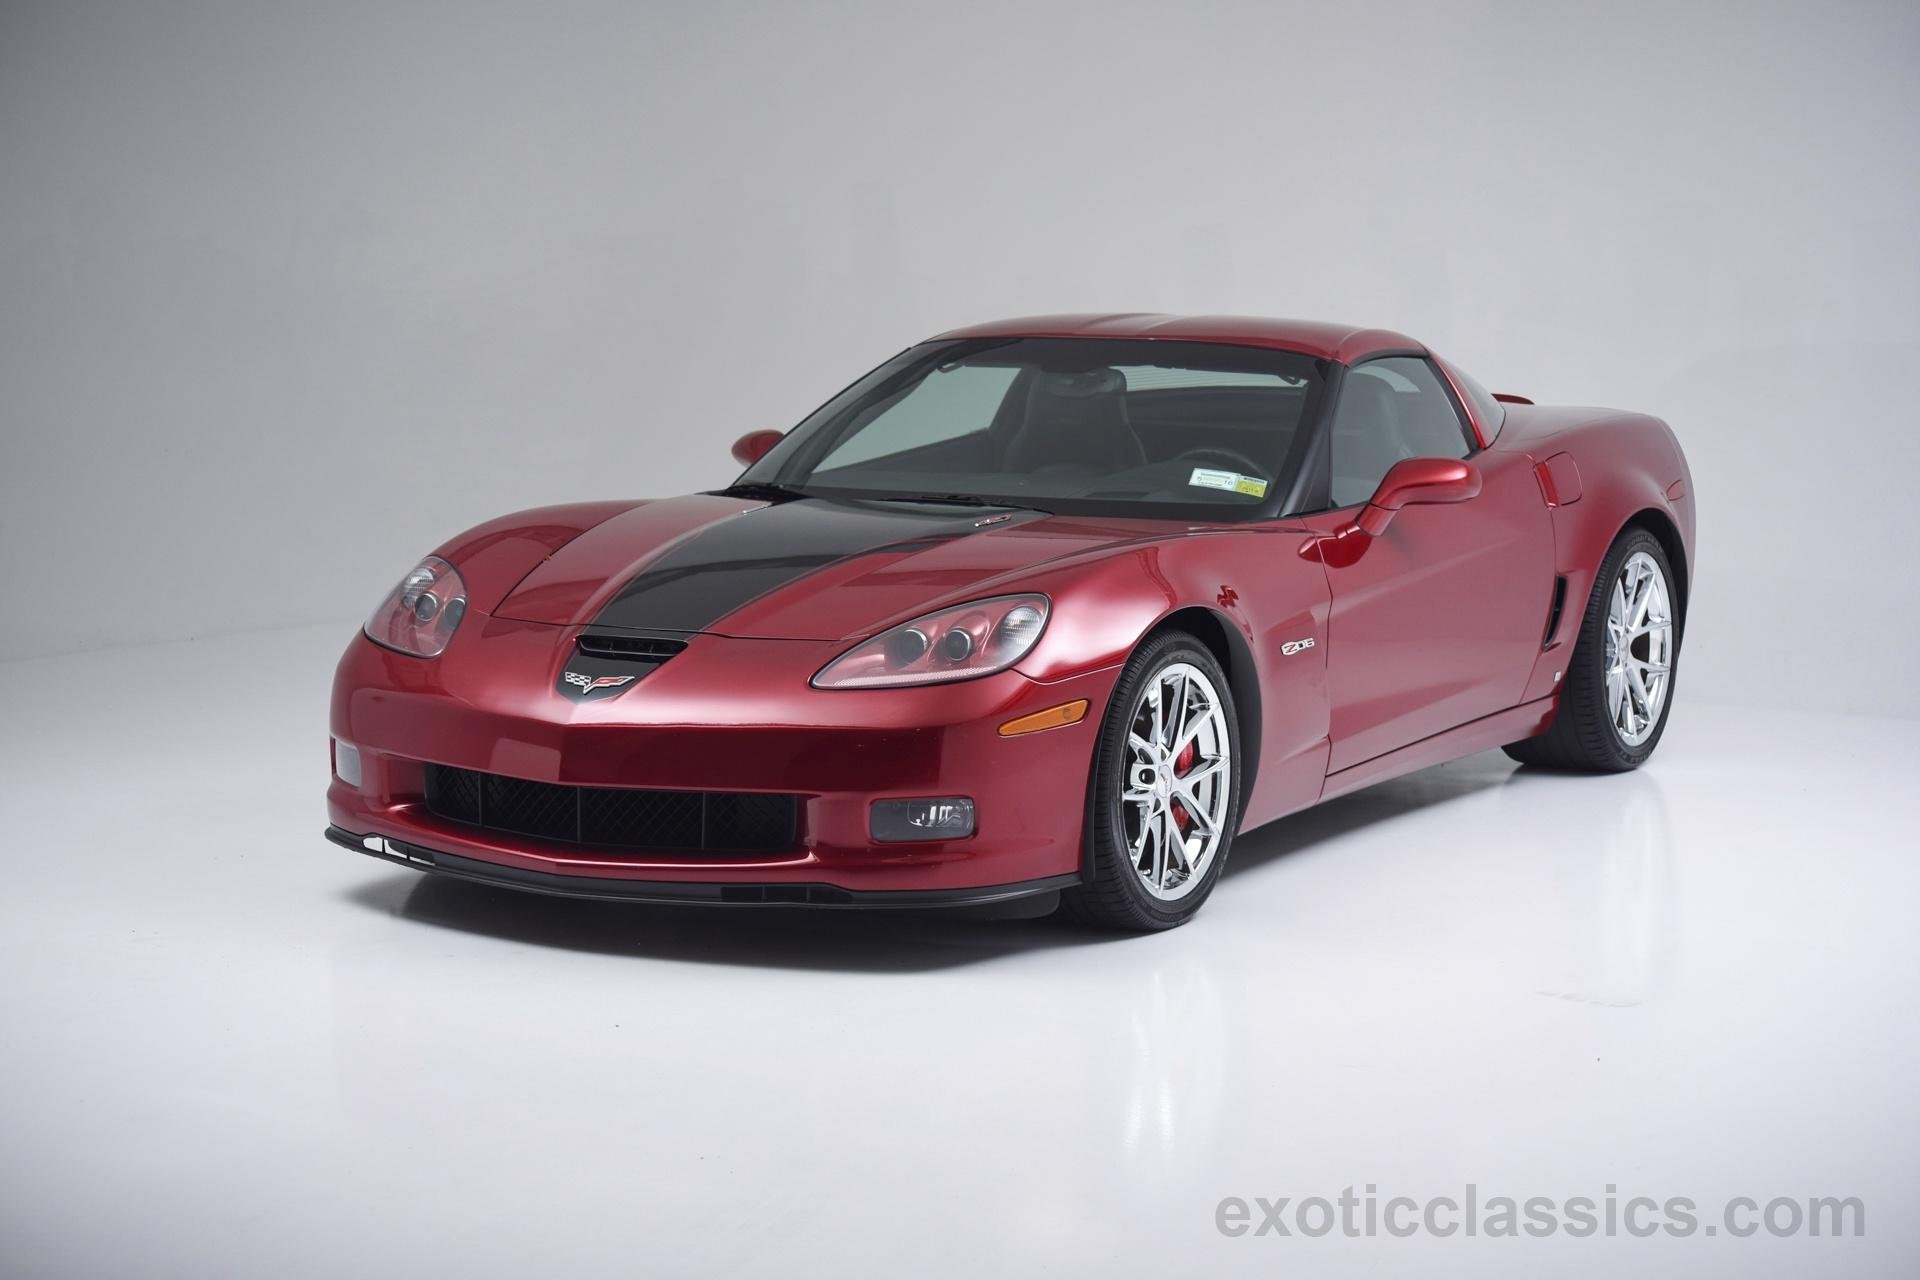 2008, Chevrolet, Corvette, Z06, Cooksey, Edition, 427, Coupe, Cars, Red Wallpaper